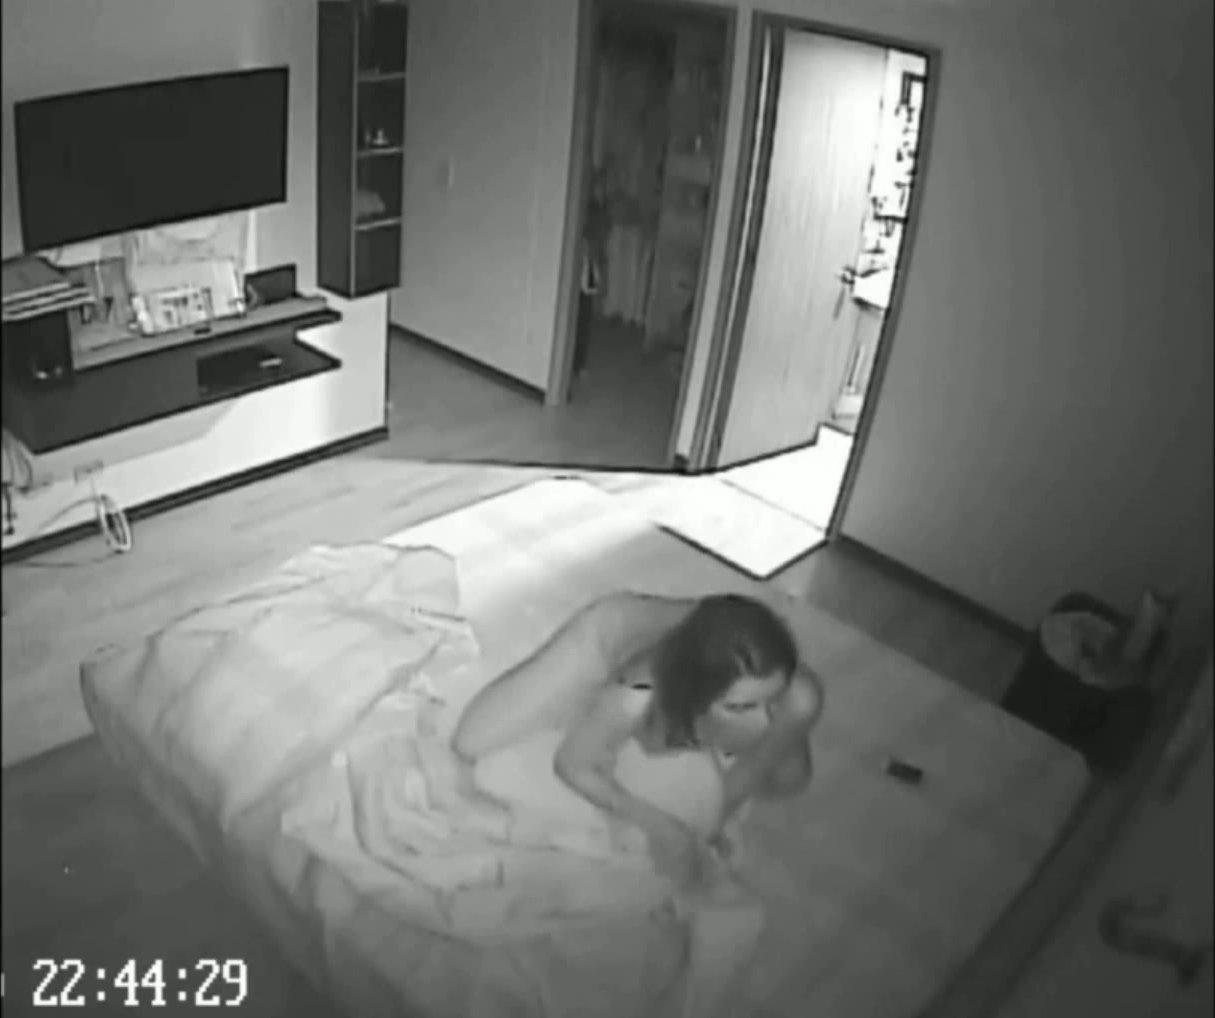 Straight Voyeur 2 hacked Ip cam pillow humping picture pic